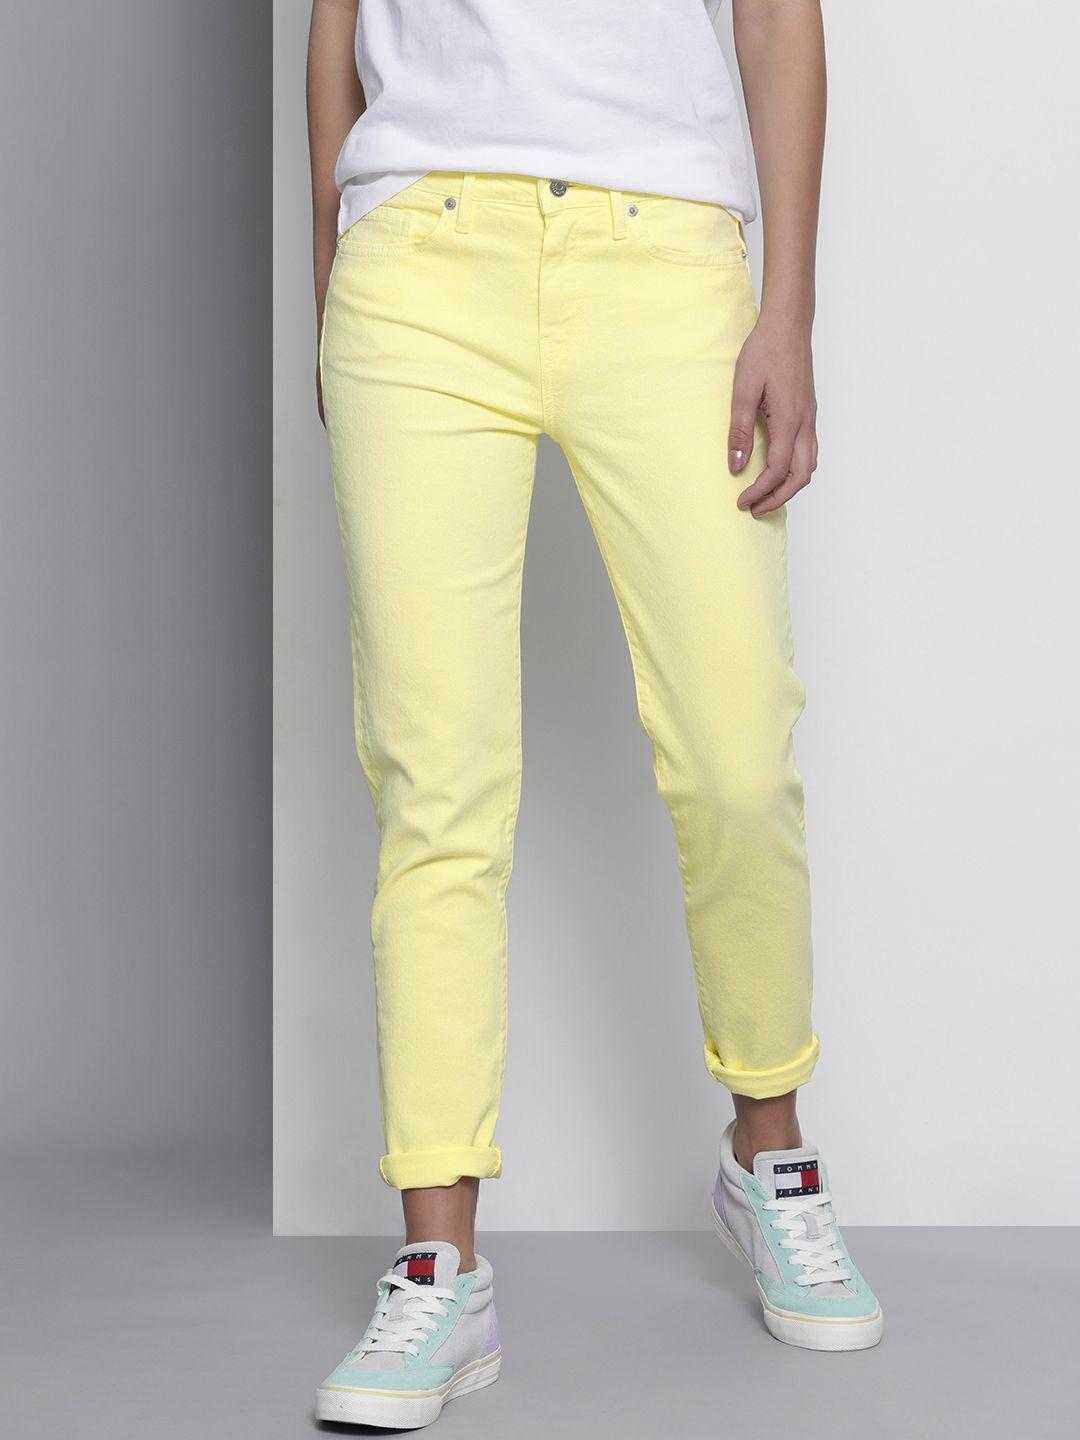 tommy hilfiger women yellow slim fit mid rise clean look stretchable jeans